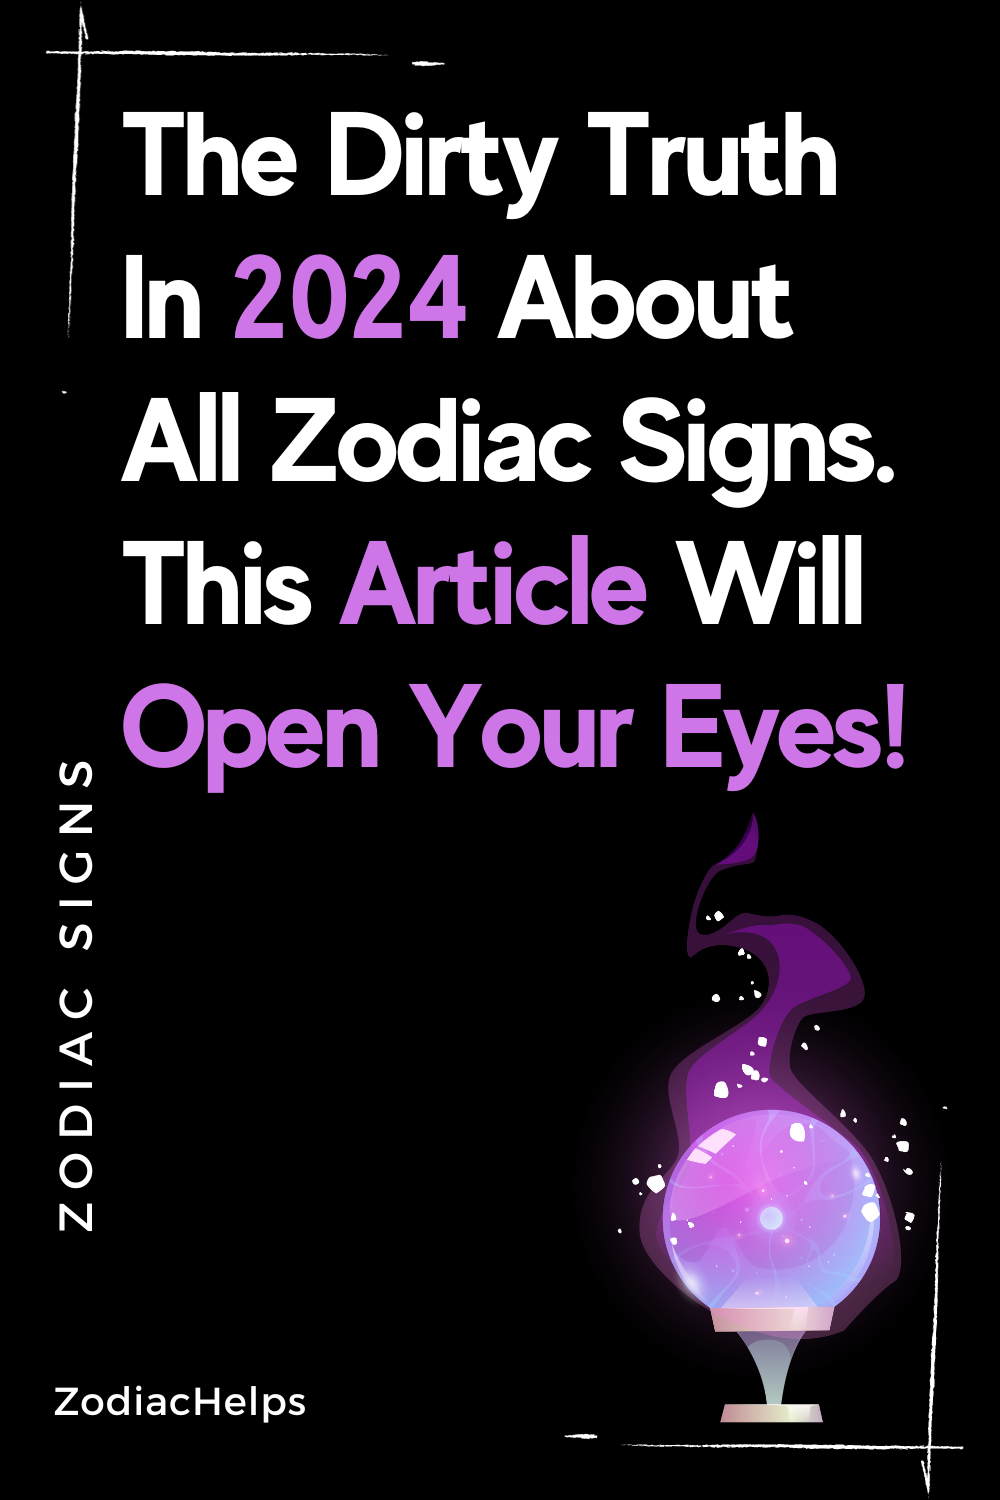 The Dirty Truth In 2024 About All Zodiac Signs. This Article Will Open Your Eyes!